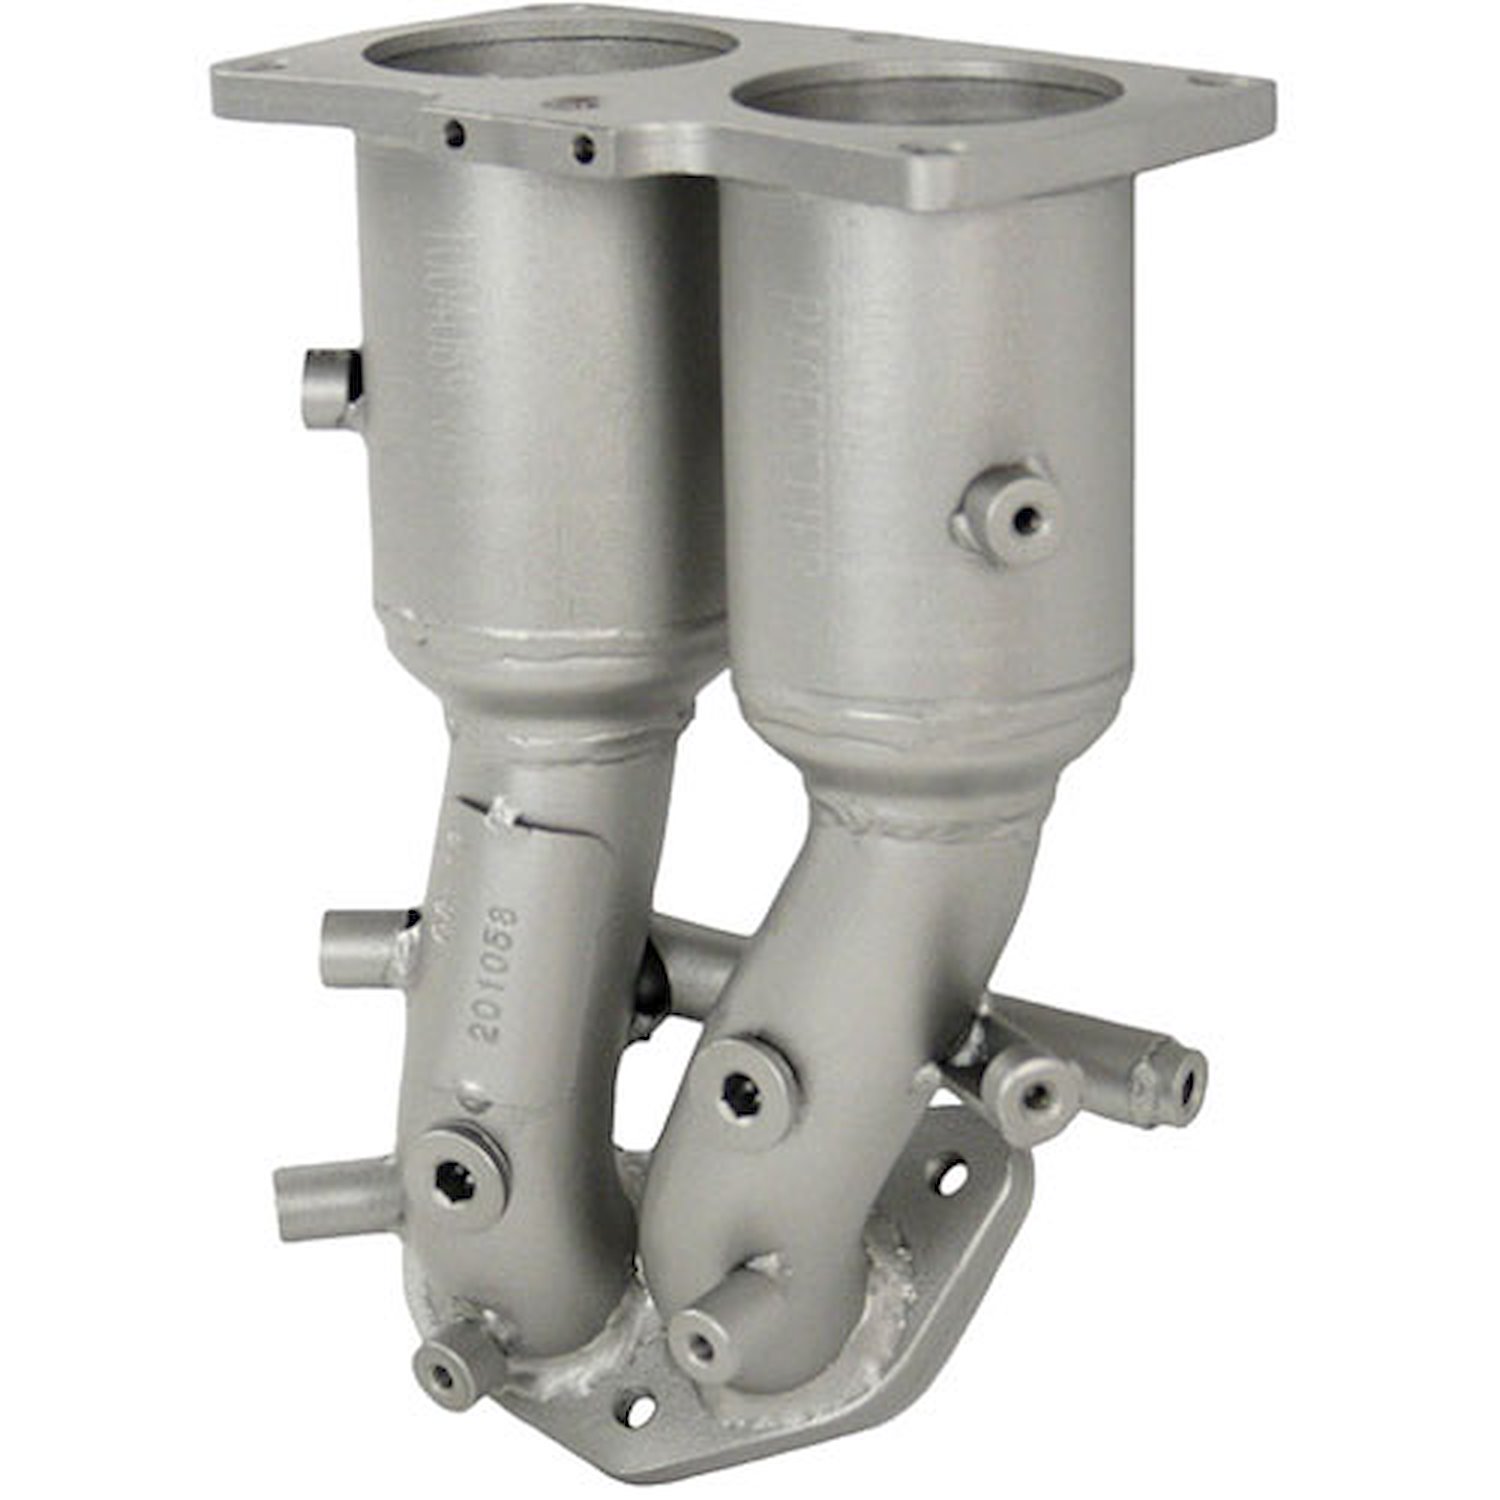 Pacesetter Direct-Fit Catalytic Converter. Direct Replacement of OEM,Stainless Steel Construction, Low Restriction Design